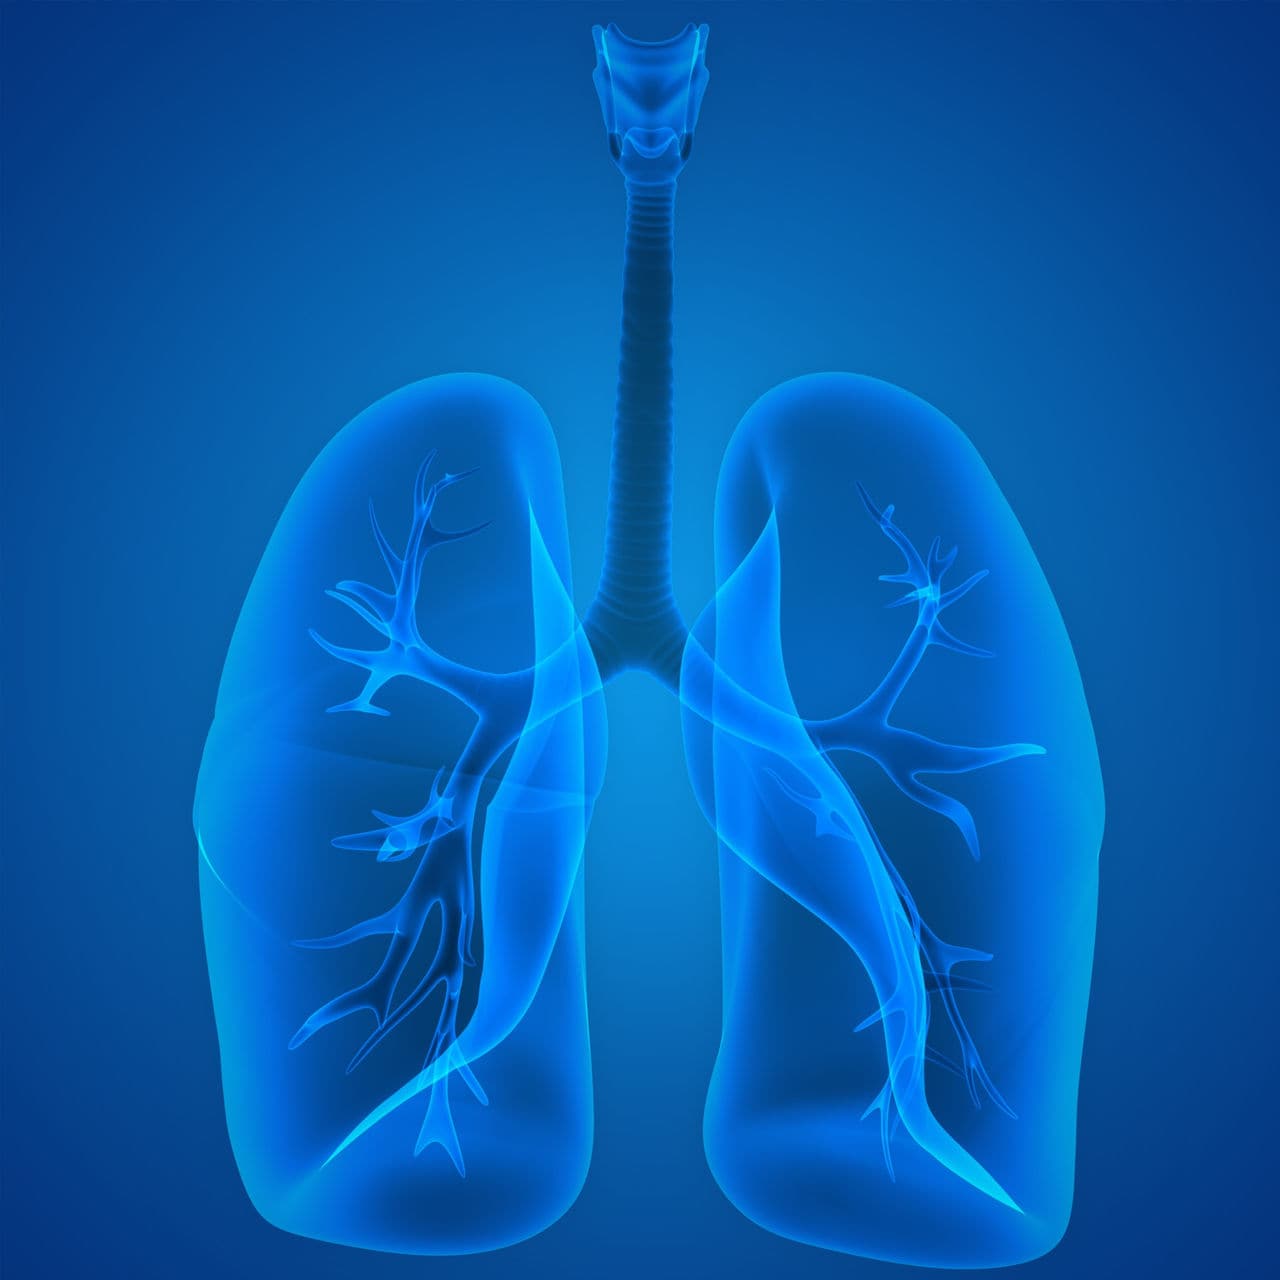 The respiratory system's lungs displayed on a blue background.